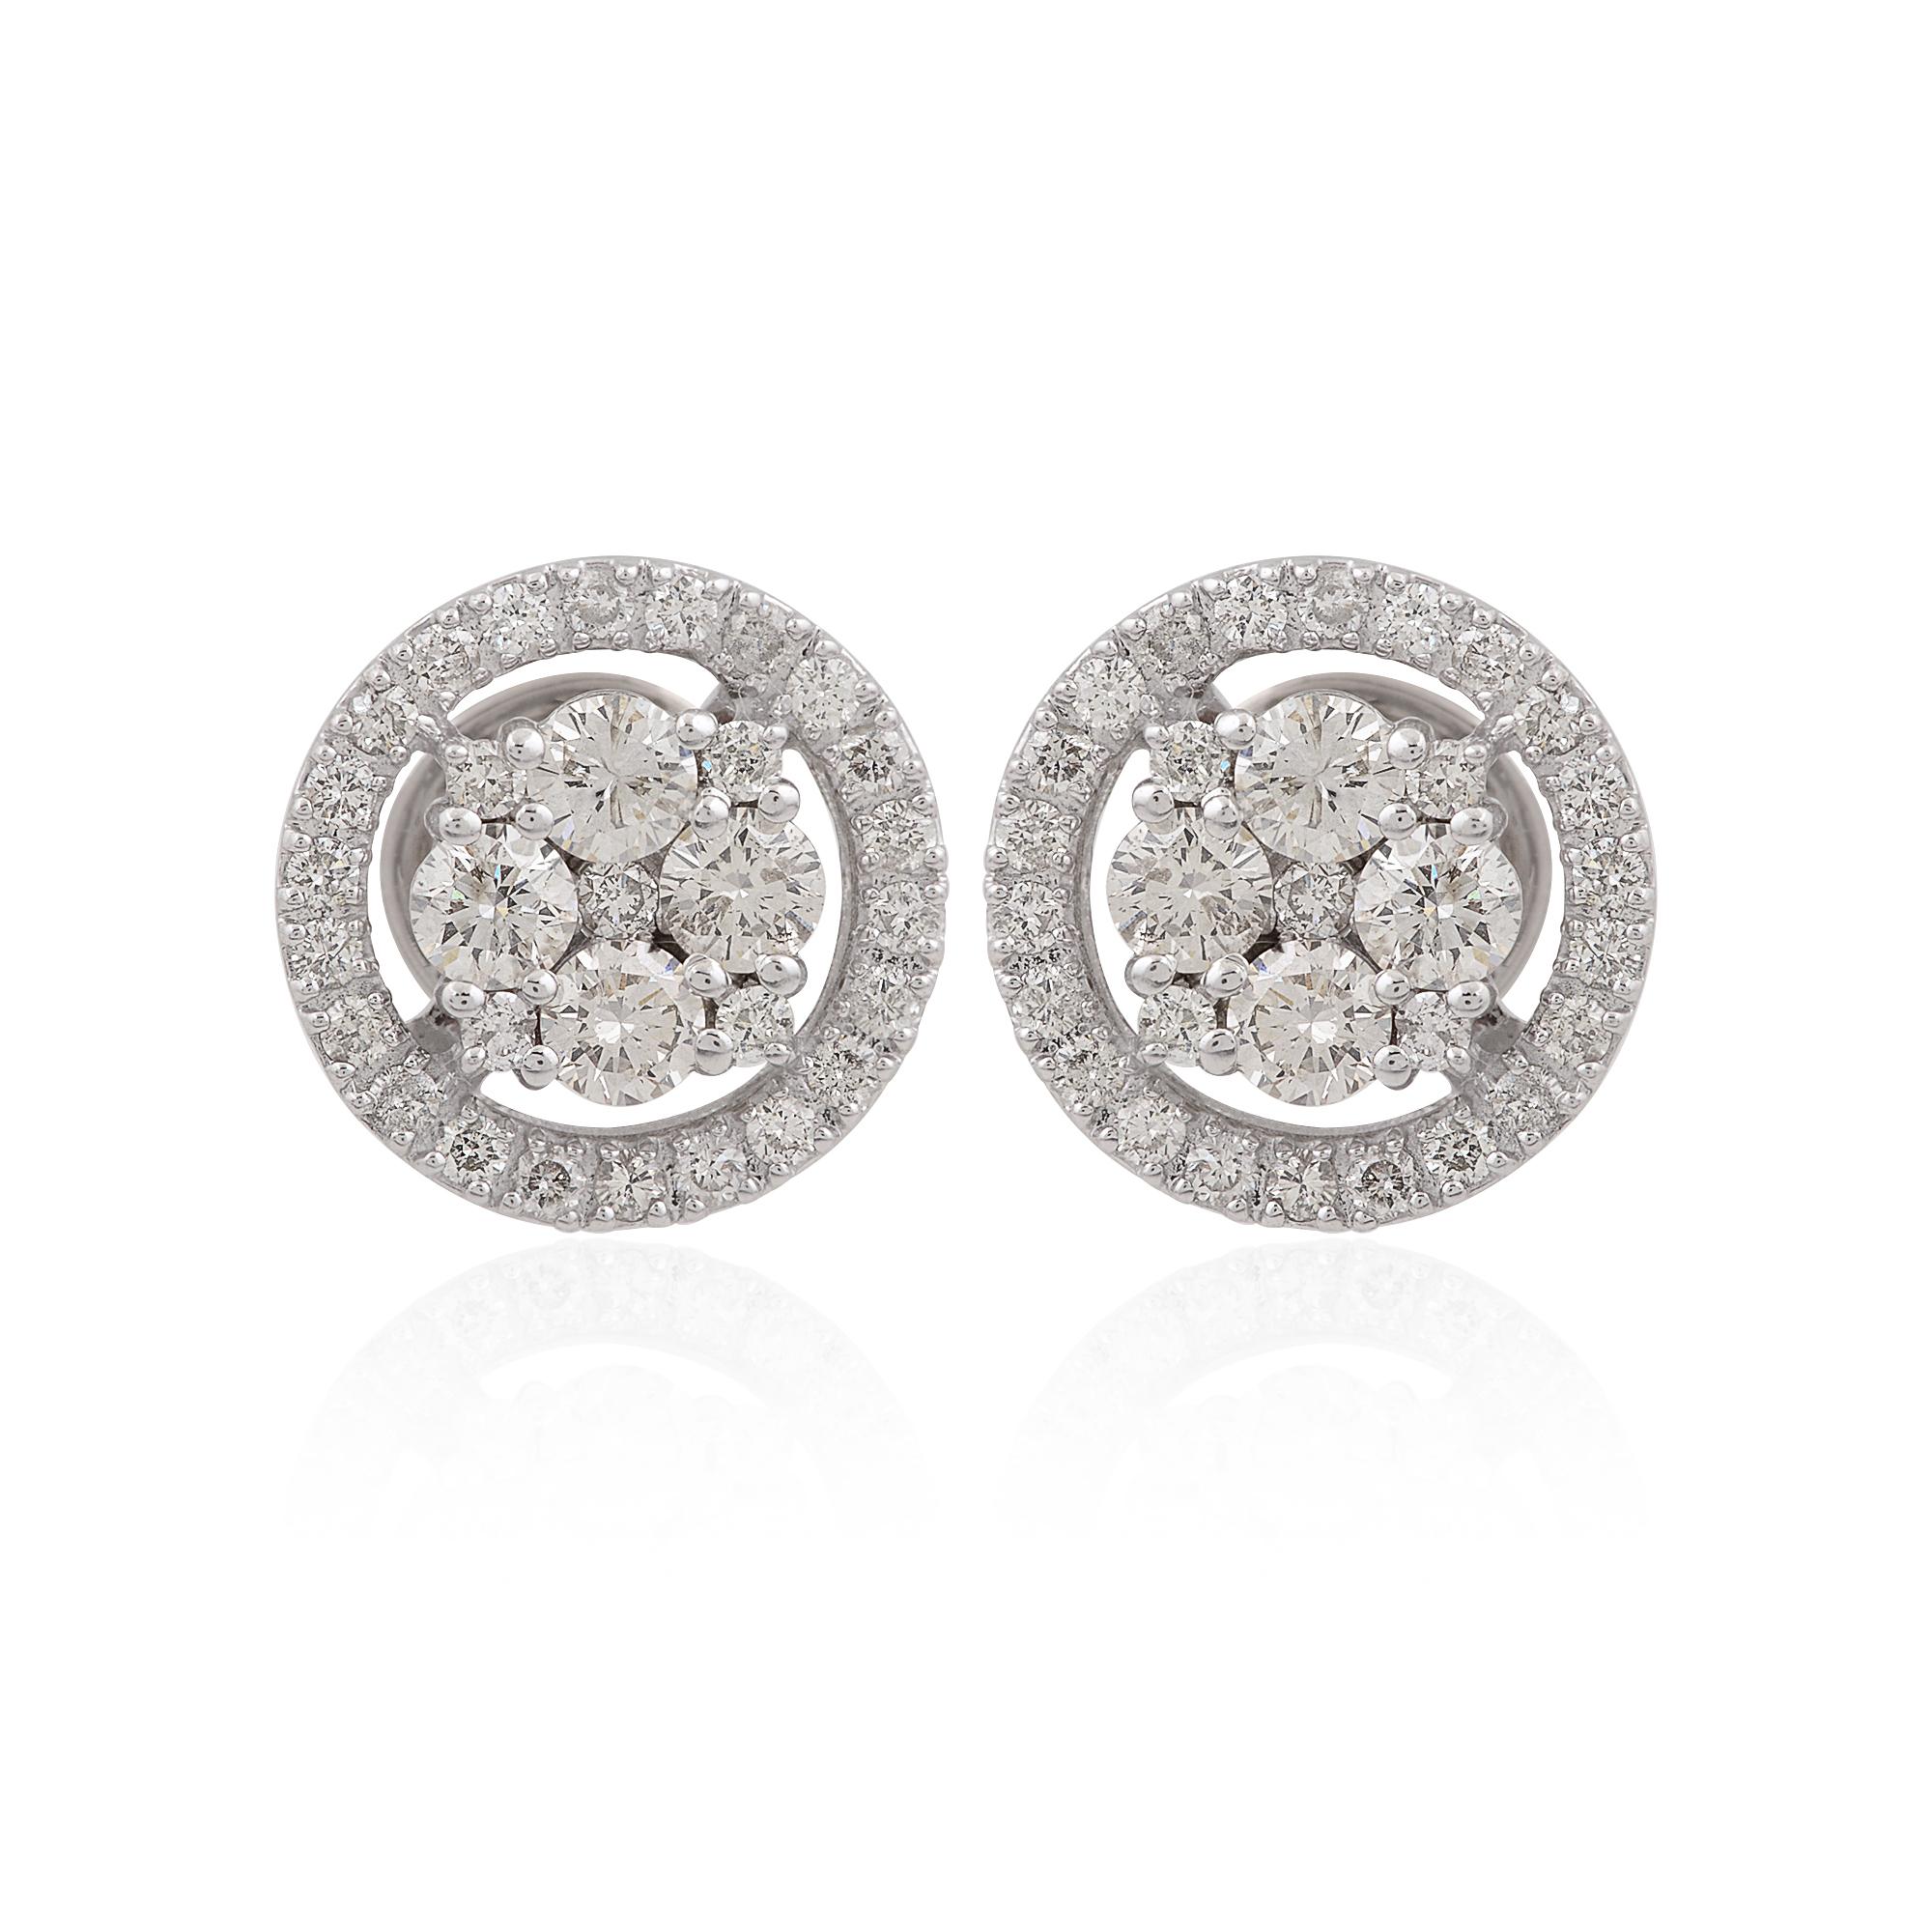 Item Code :- SFE-1052J
Gross Wt. :- 3.98 gm
18k White Gold Wt. :- 3.70 gm
Natural Diamond Wt. :- 1.40 Ct. ( AVERAGE DIAMOND CLARITY SI1-SI2 & COLOR H-I )
Earrings Size :- 12 mm approx.

✦ Sizing
.....................
We can adjust most items to fit